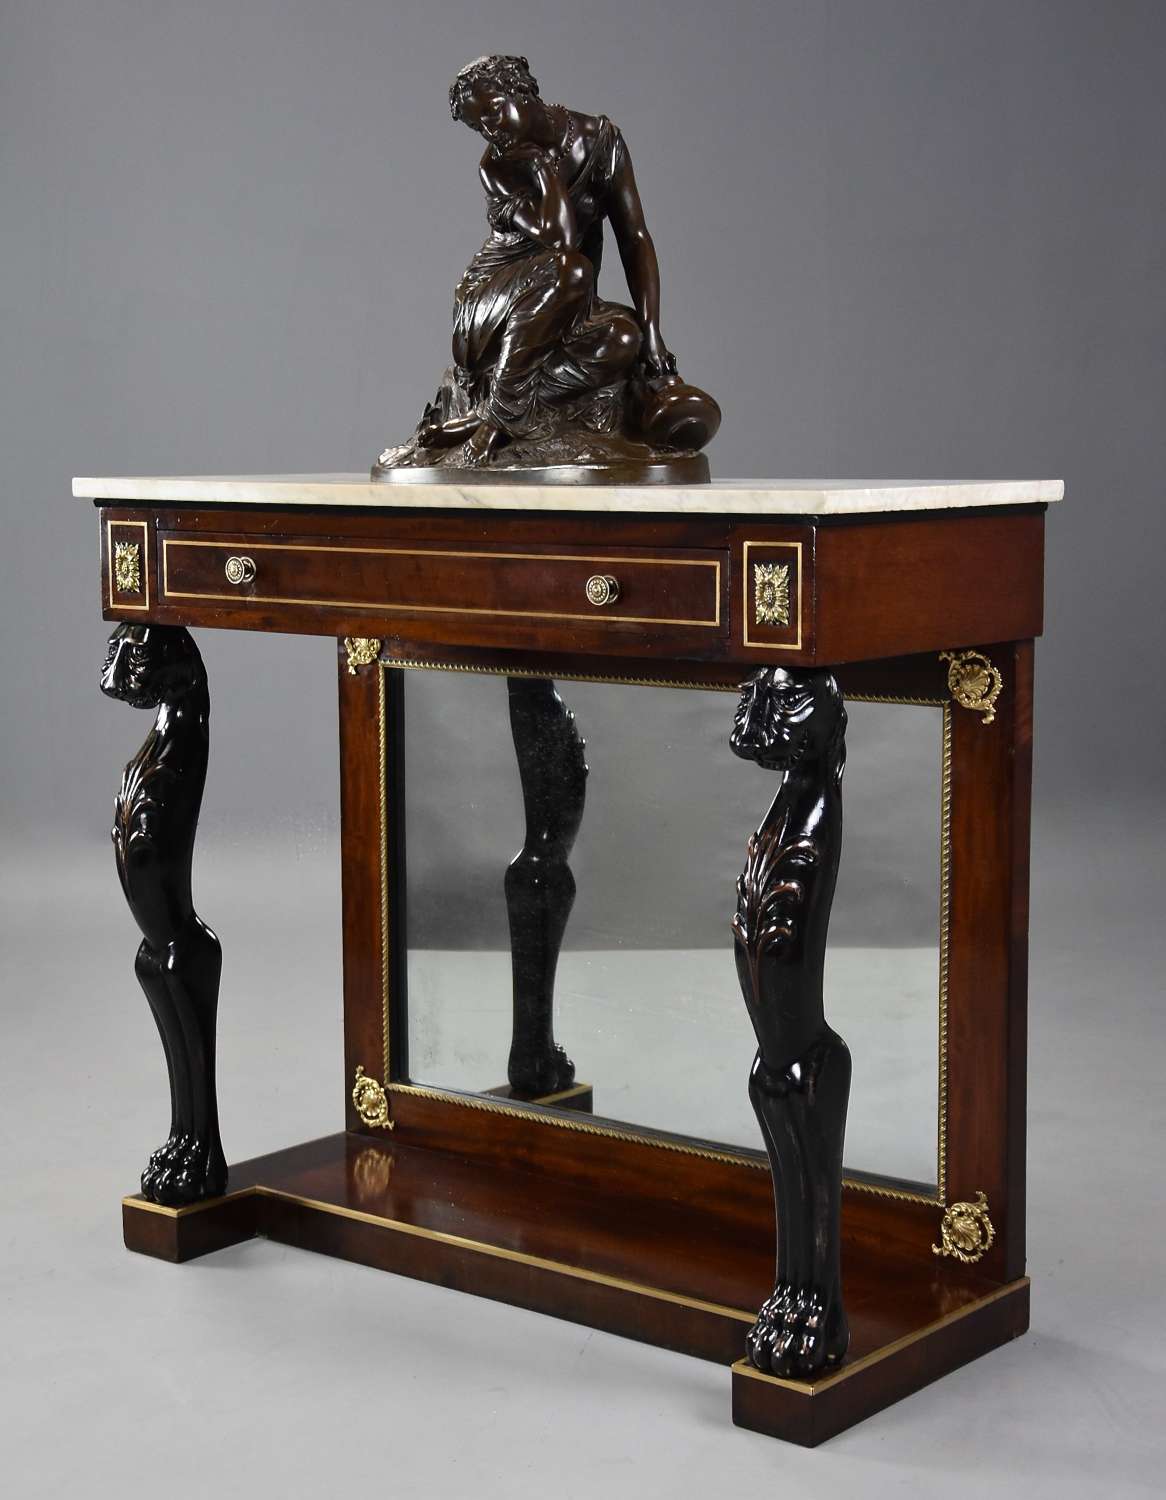 19th century Regency mahogany console table of small proportions